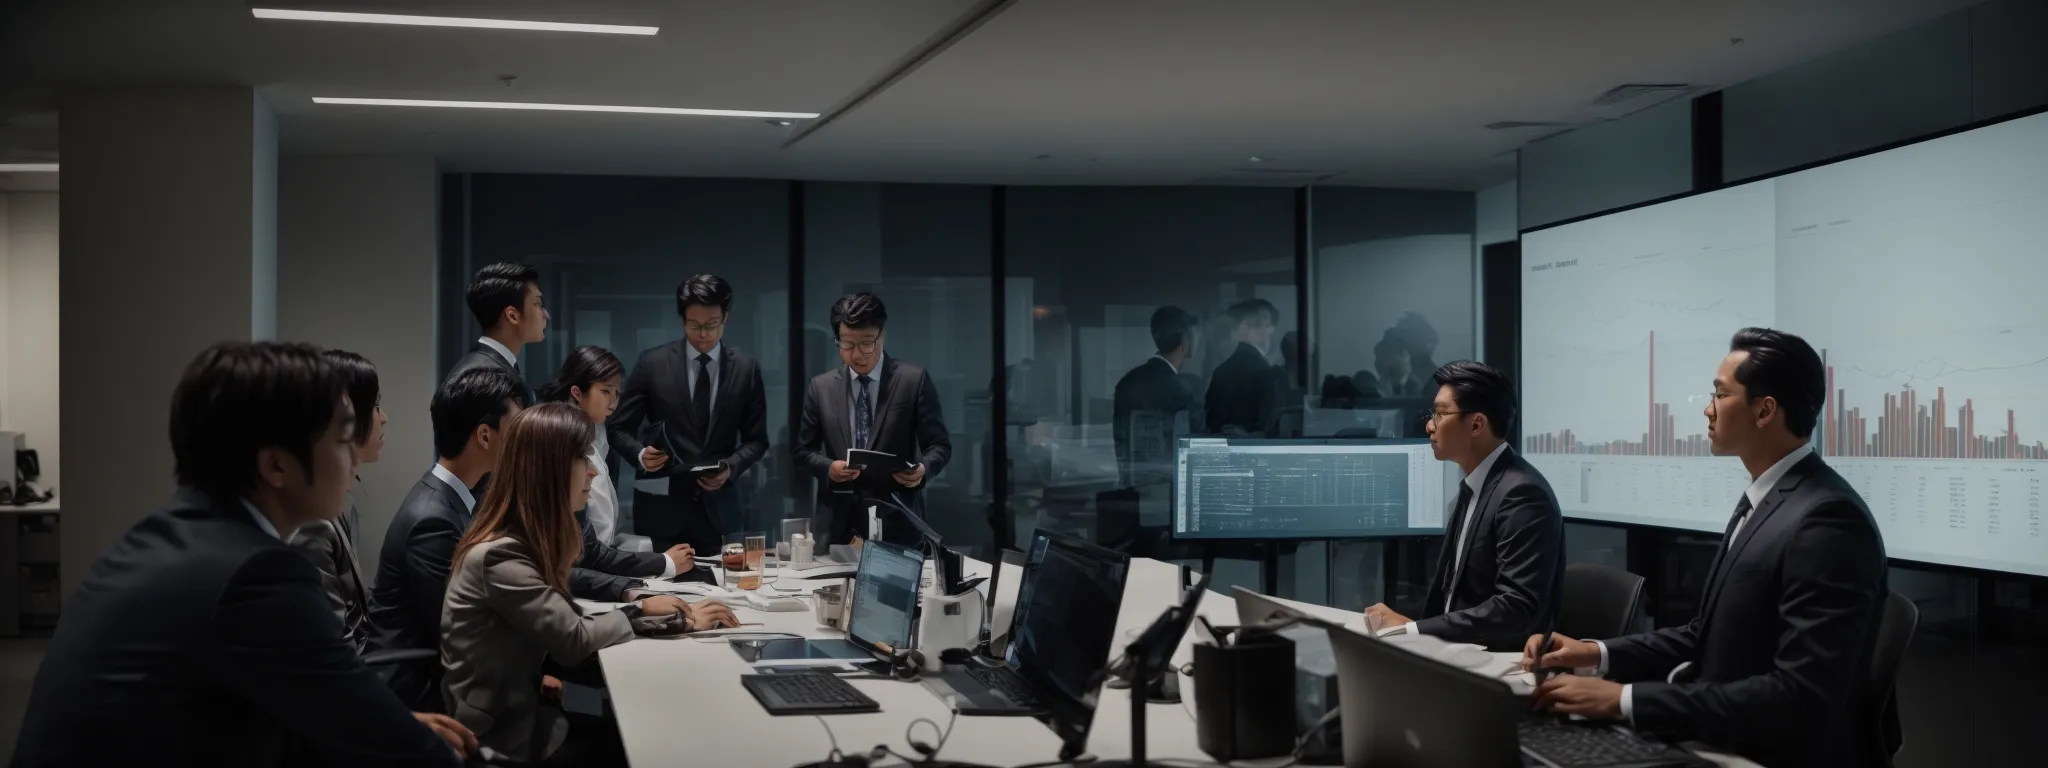 a group of professionals analyzing charts and graphs on a large screen in a modern office setting.